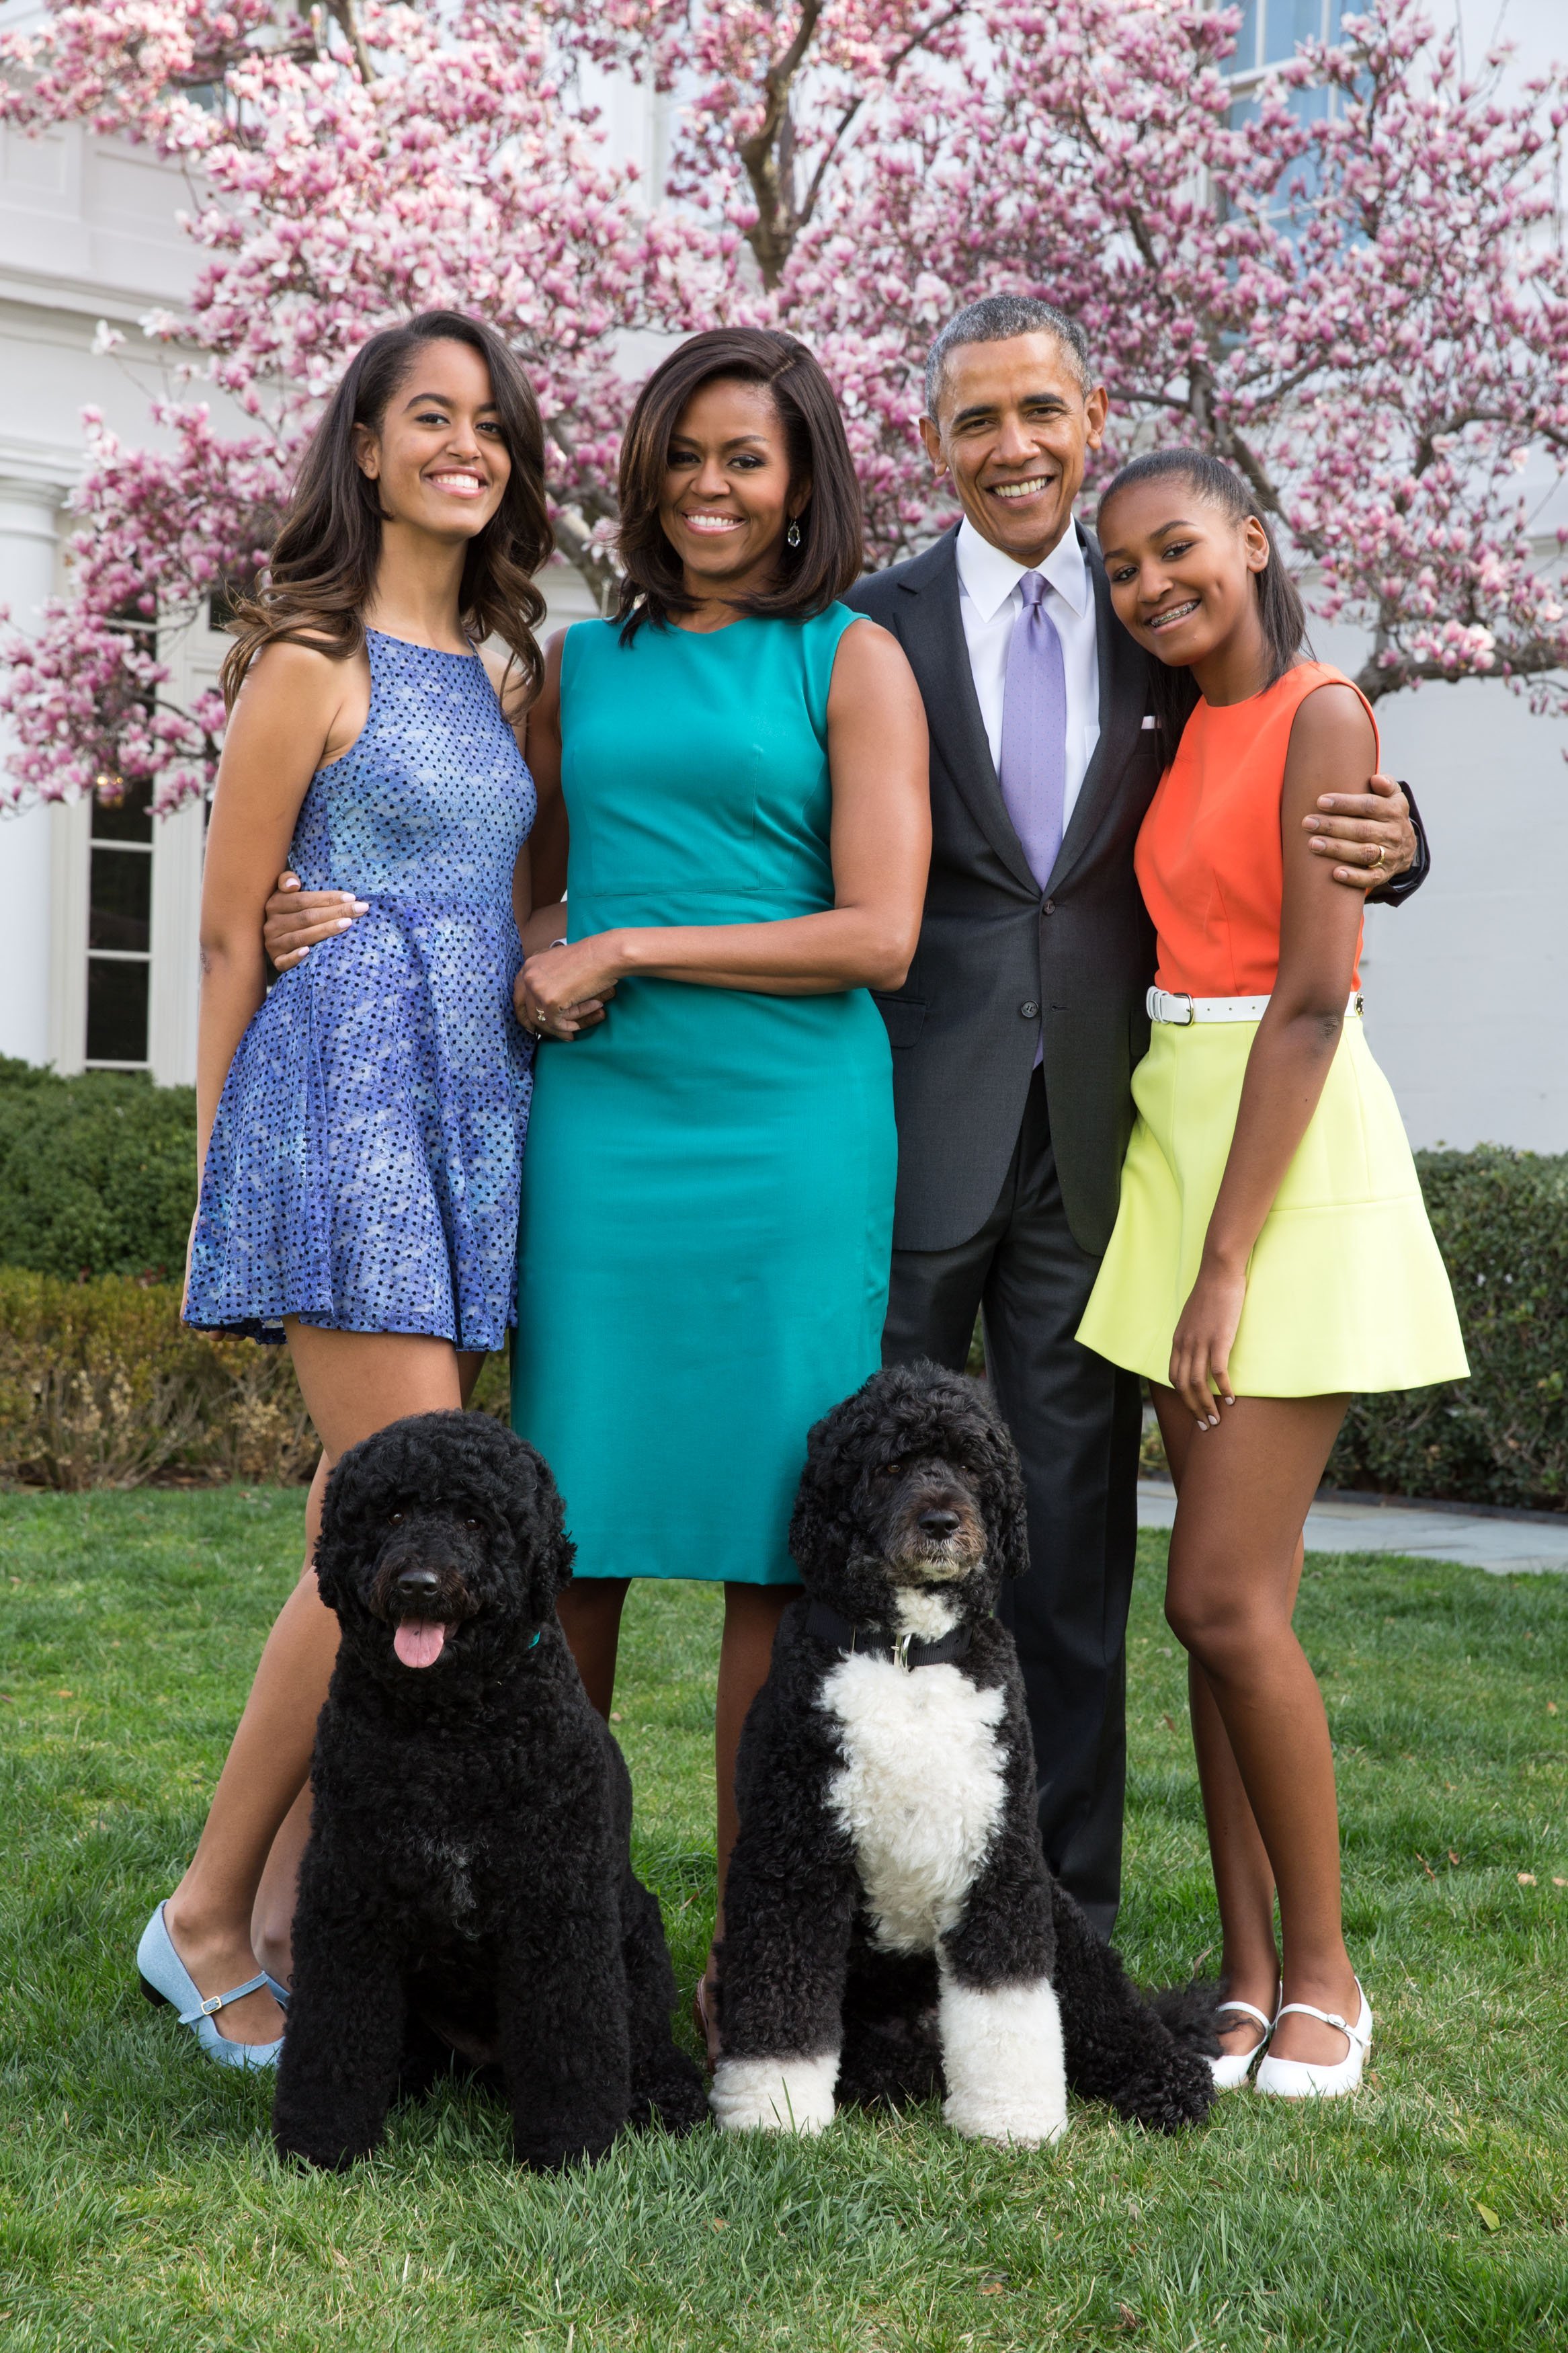 Barack Obama, Michelle, Malia & Sasha pose for a family portrait with their pets Bo and Sunny at the White House on April 5, 2015 in Washington, DC. | Photo: Getty Images.